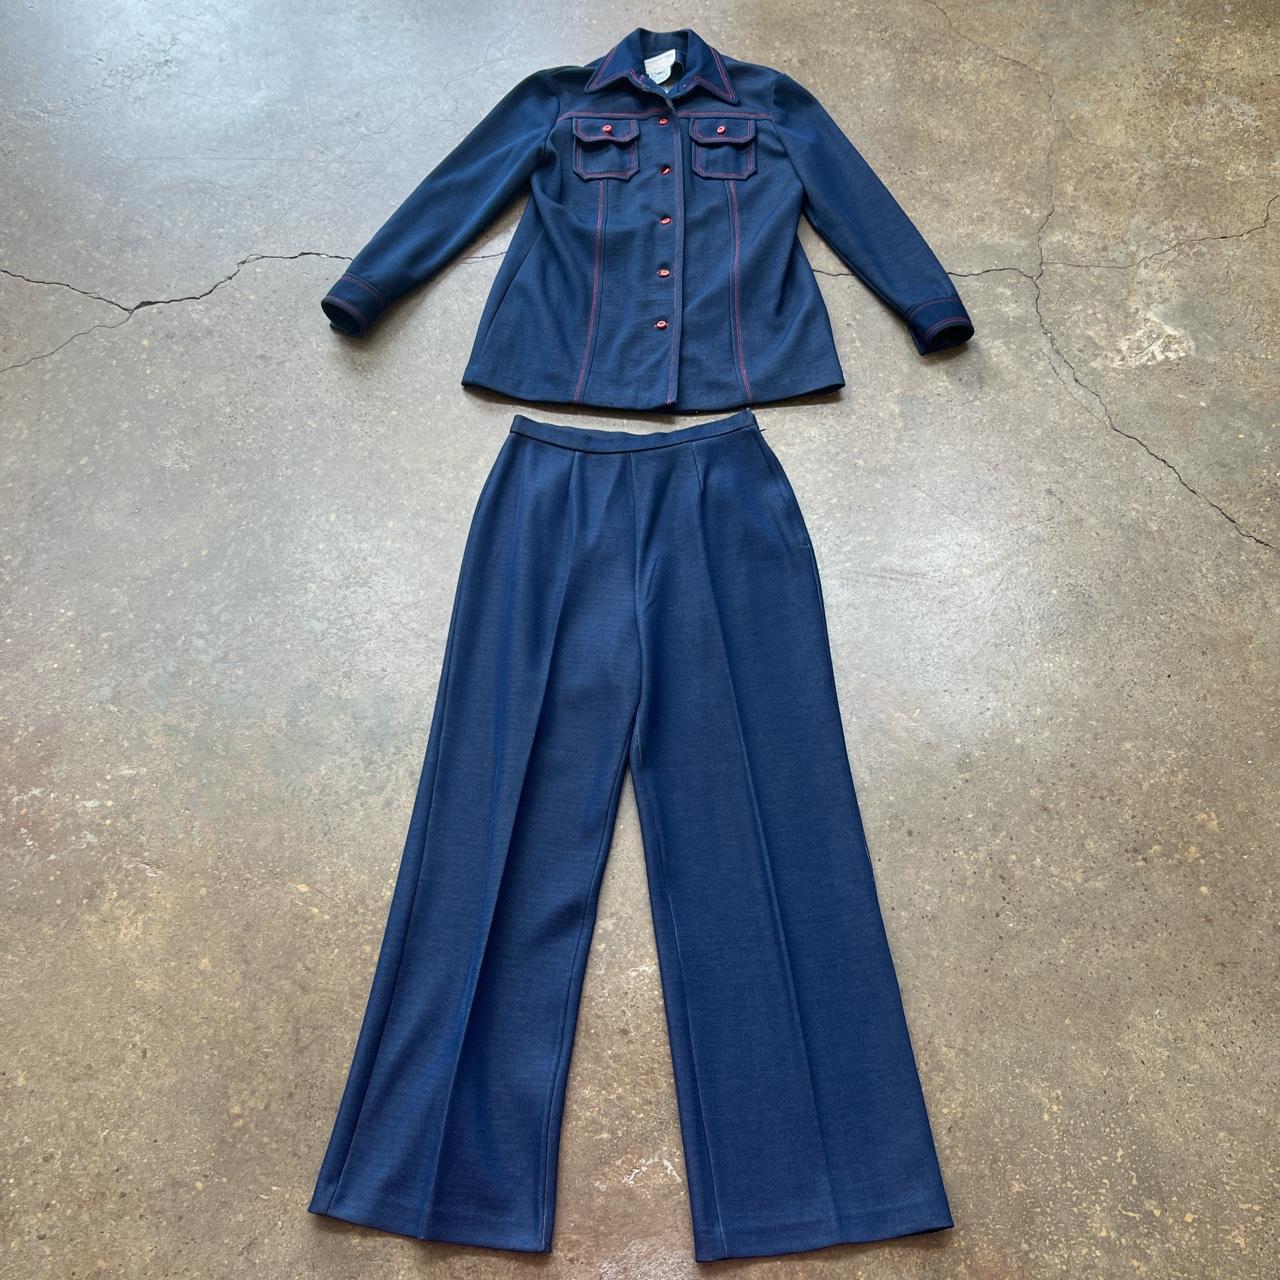 American Vintage Women's Navy and Blue Suit